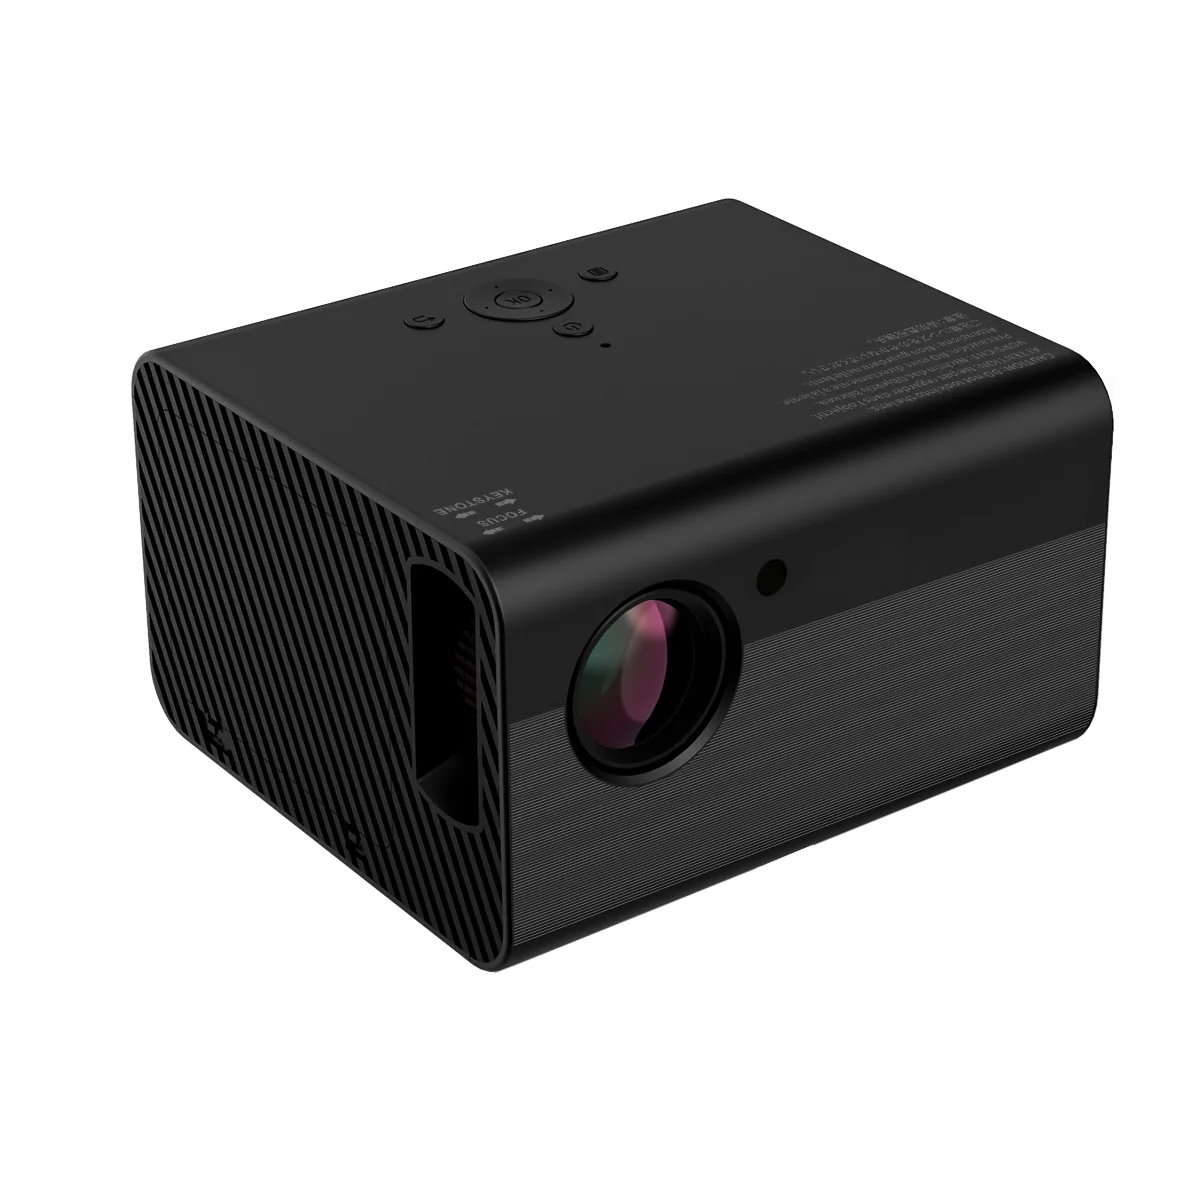 

T10 Full HD 1080P Projector Mini LED Proyector Native 1920x1080 4500 Lumens Android Home Theater Video Beamer, 16.7k